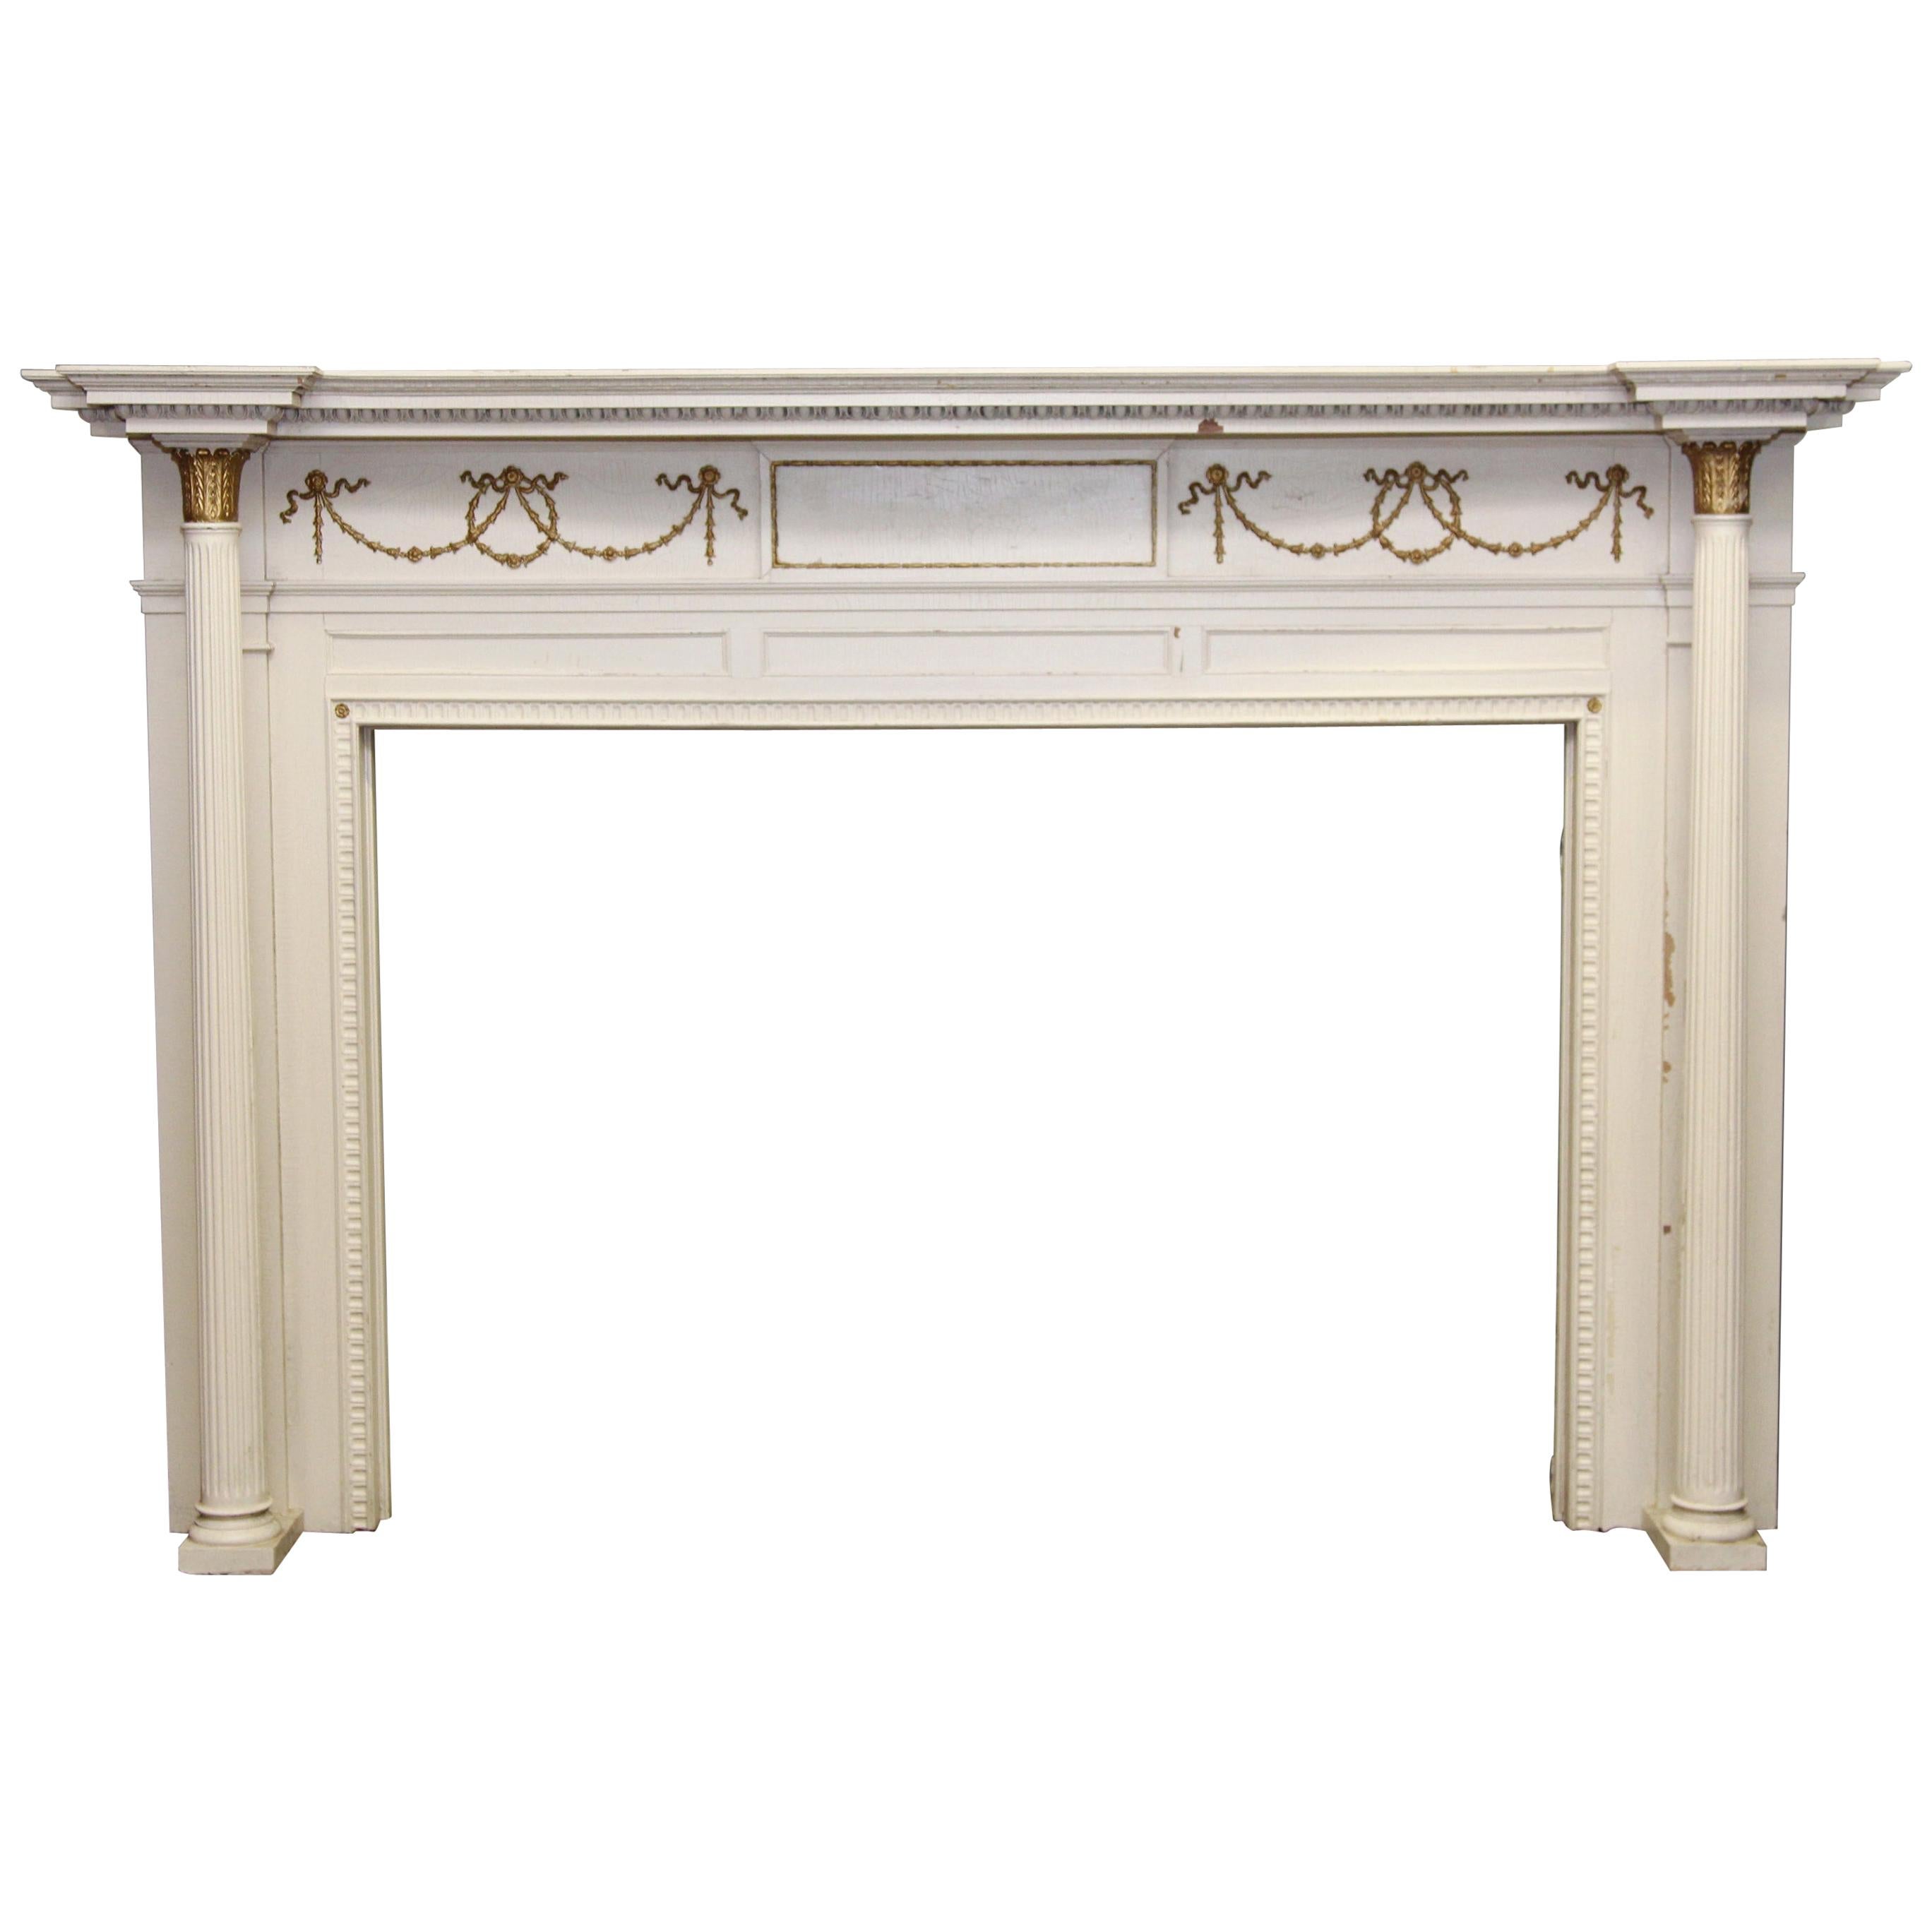 1905 White & Gold Wood Federal Style Mantel with Columns and Egg and Dart Design